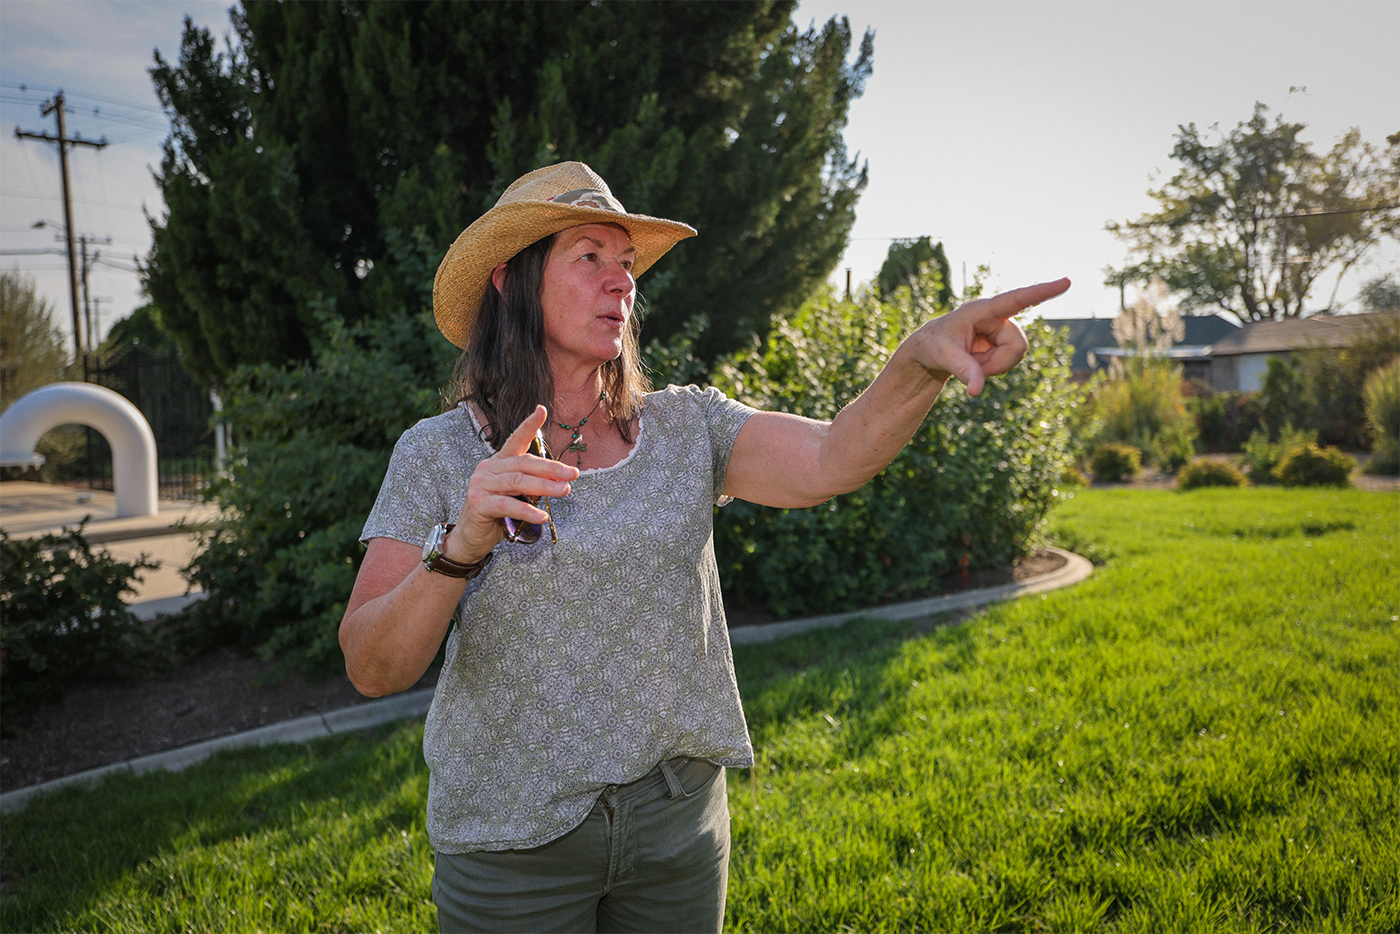 Stephanie Duer, Water Conservation Manager for SLC's Department of Public Utilities, explains how eco-conscious design is more than rocky, grassless lawns.